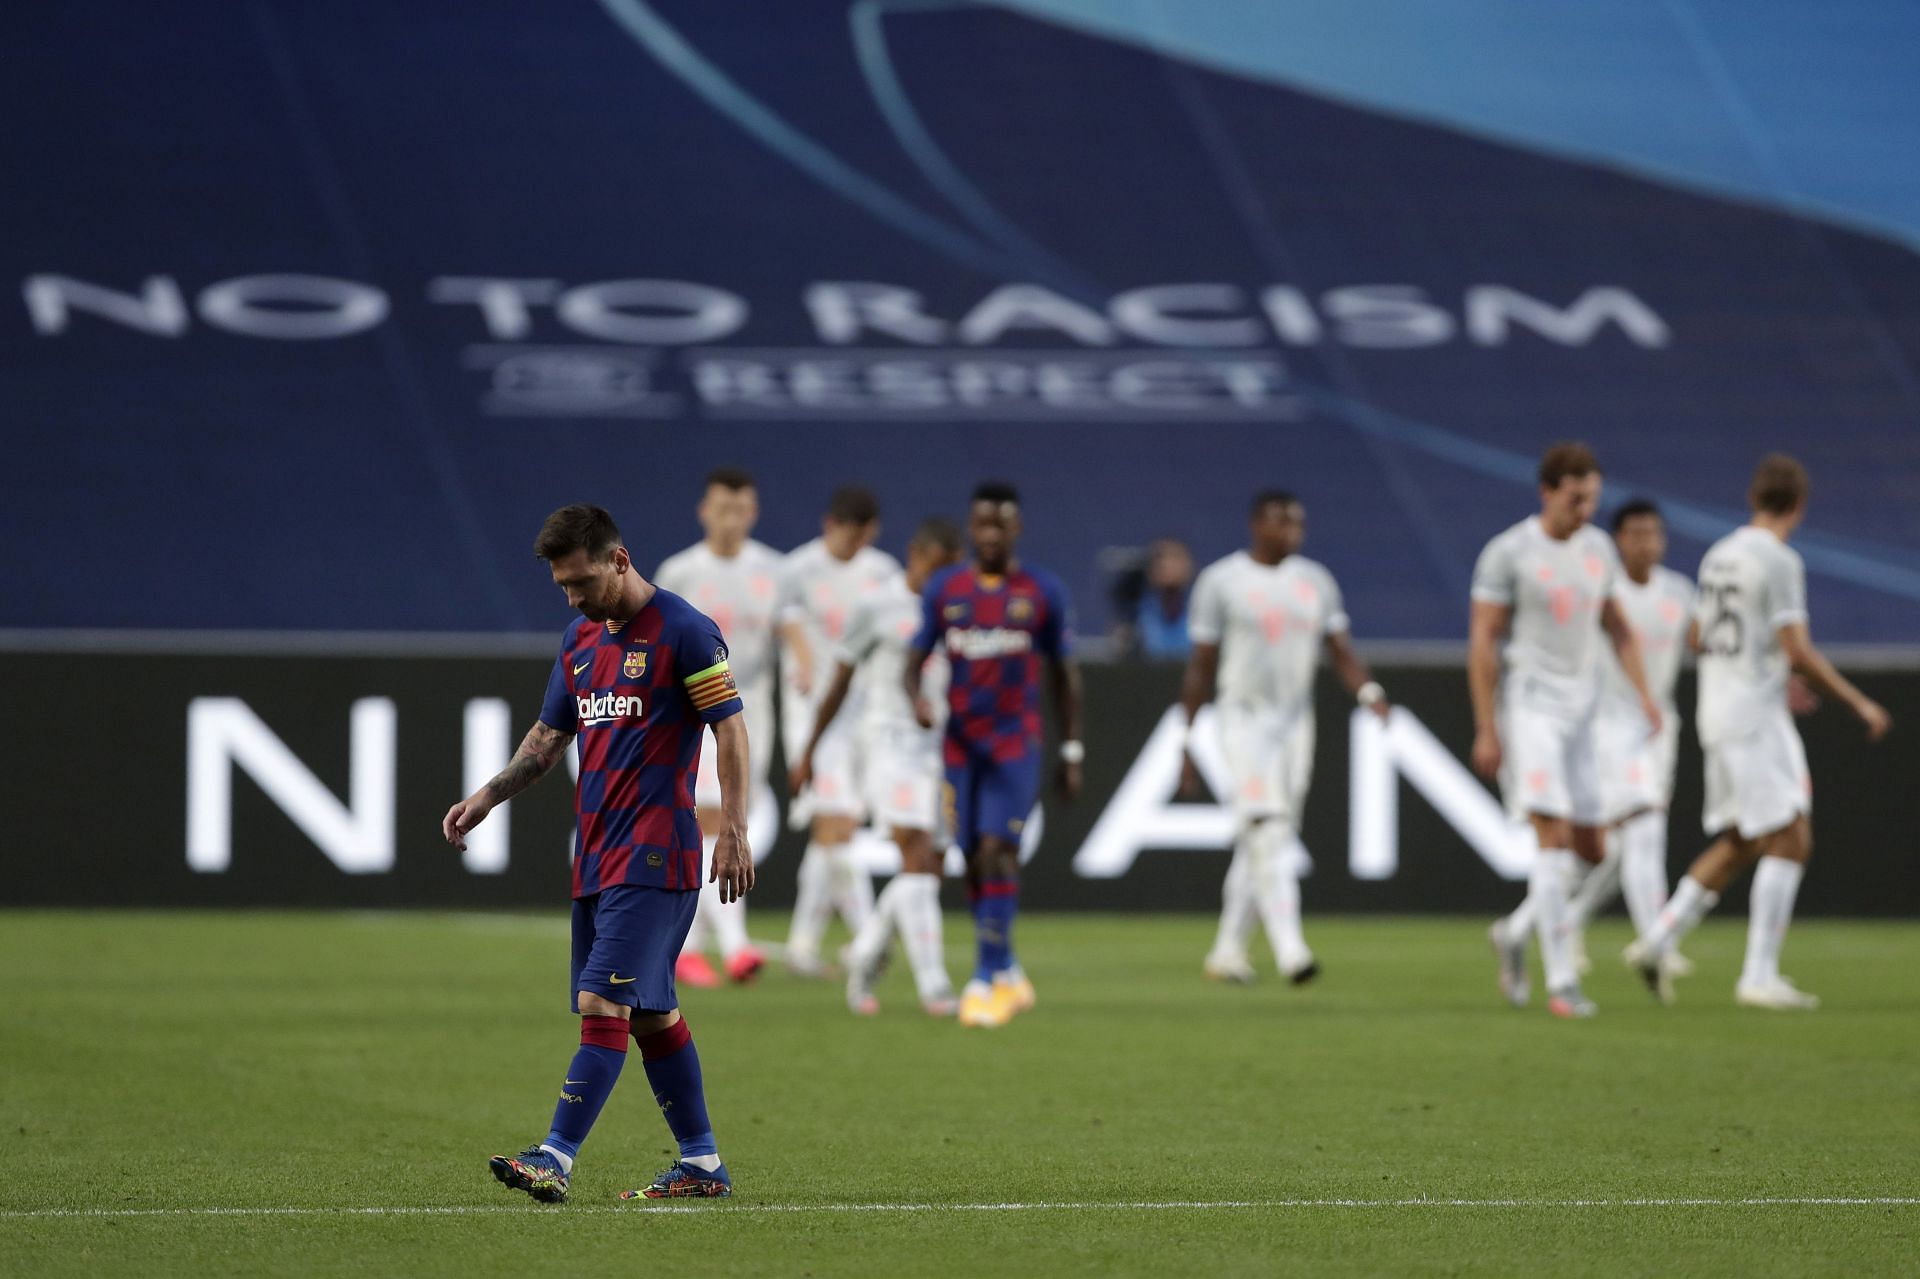 Lionel Messi captained the Blaugrana during their devastating defeat.